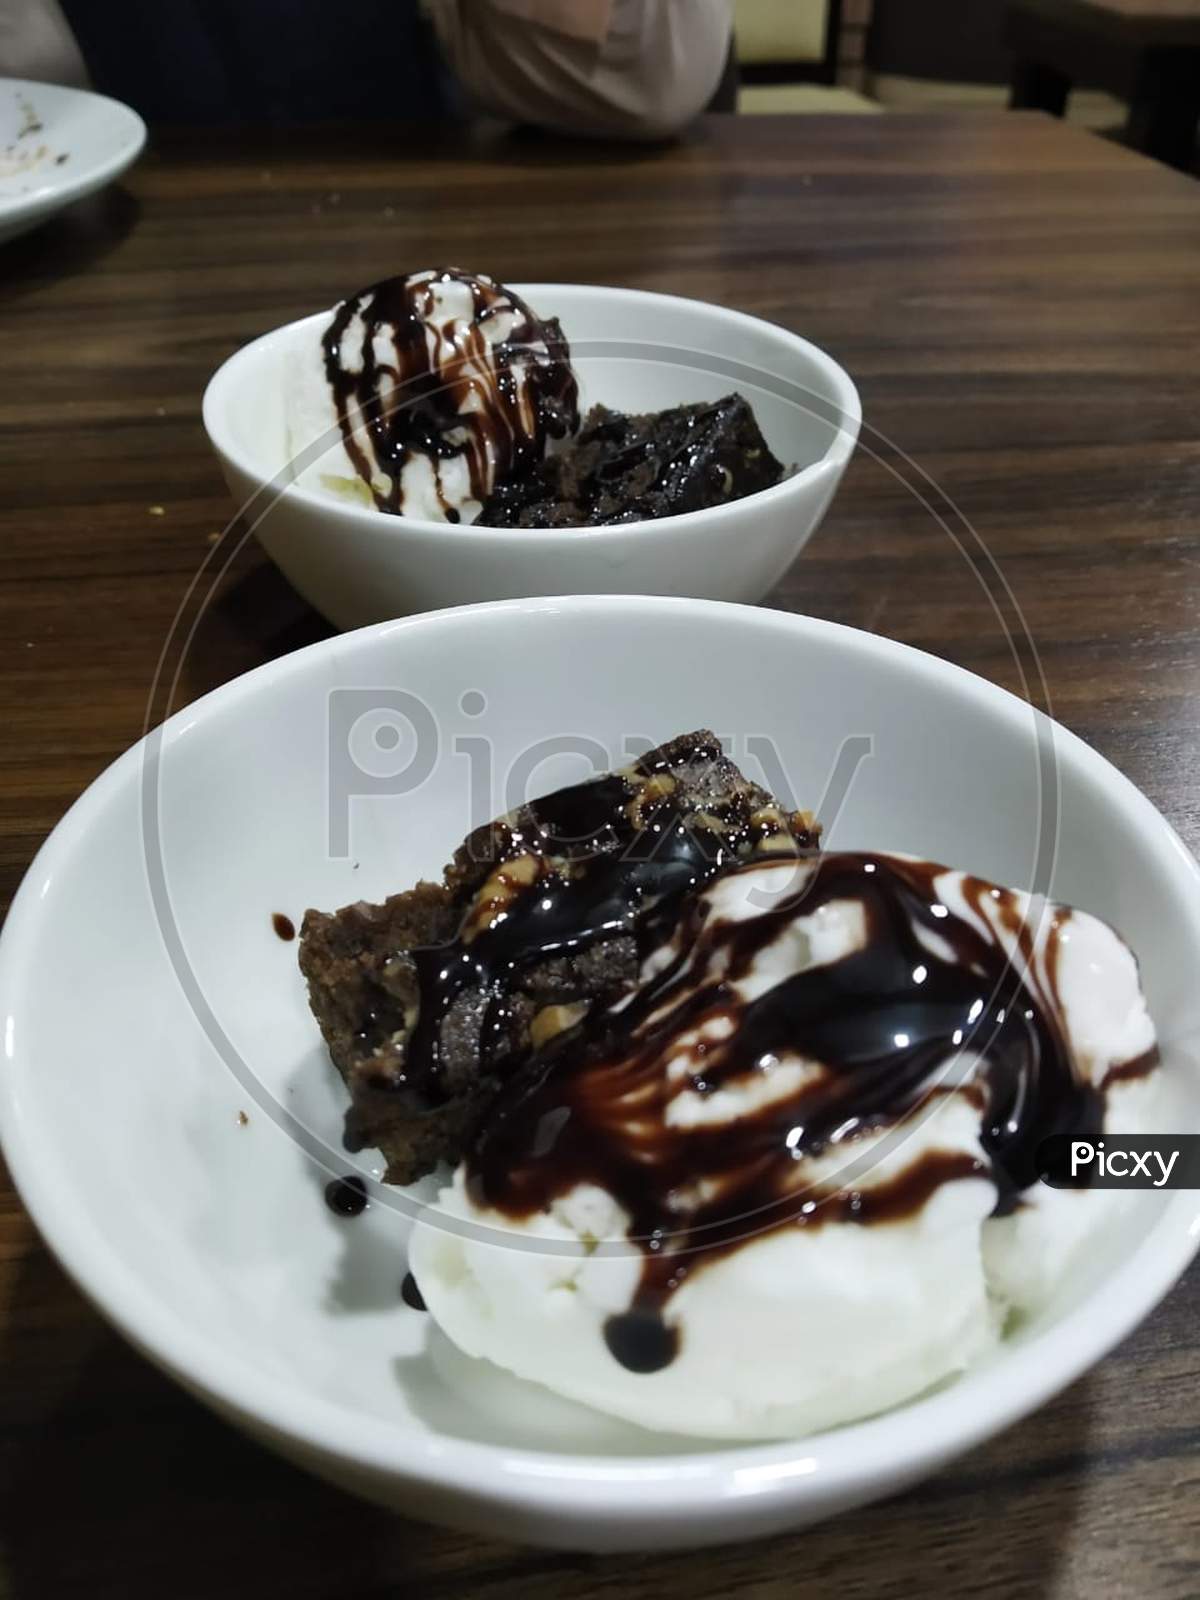 Brownie with Ice-Cream